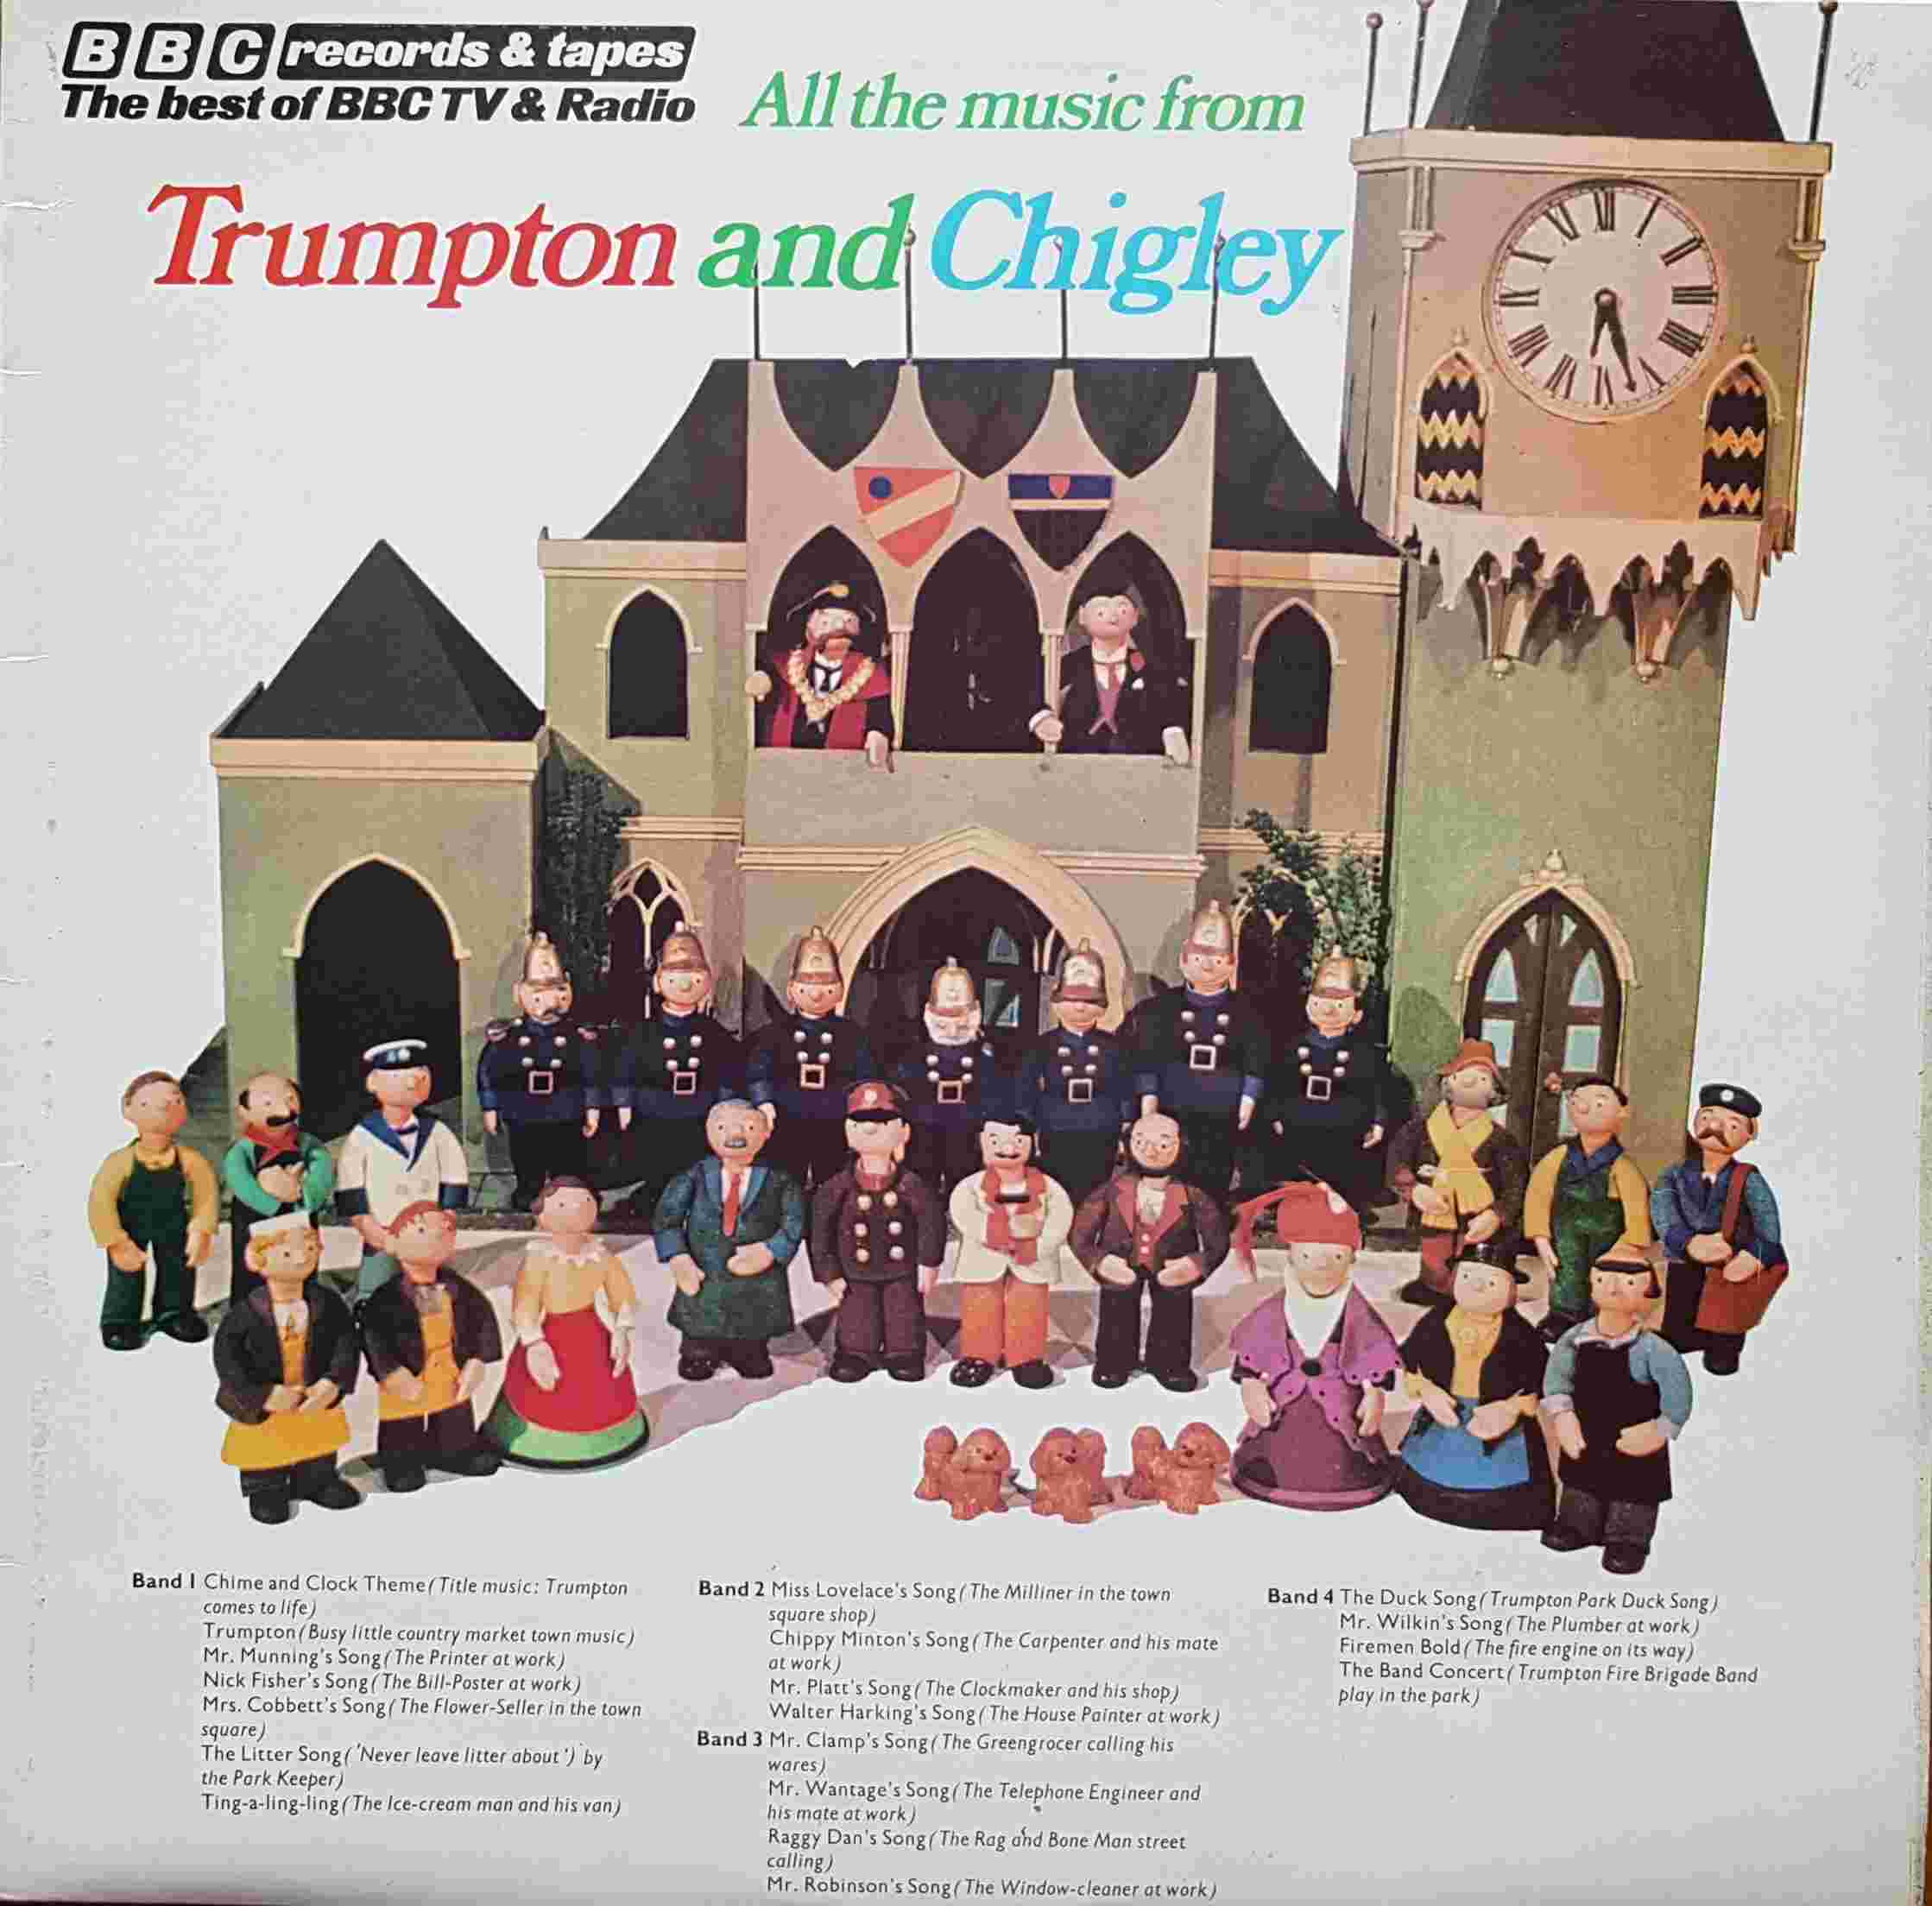 Picture of REC 234 All the music from Trumpton and Chigley by artist Freddie Phillips / Gordon Murray from the BBC albums - Records and Tapes library